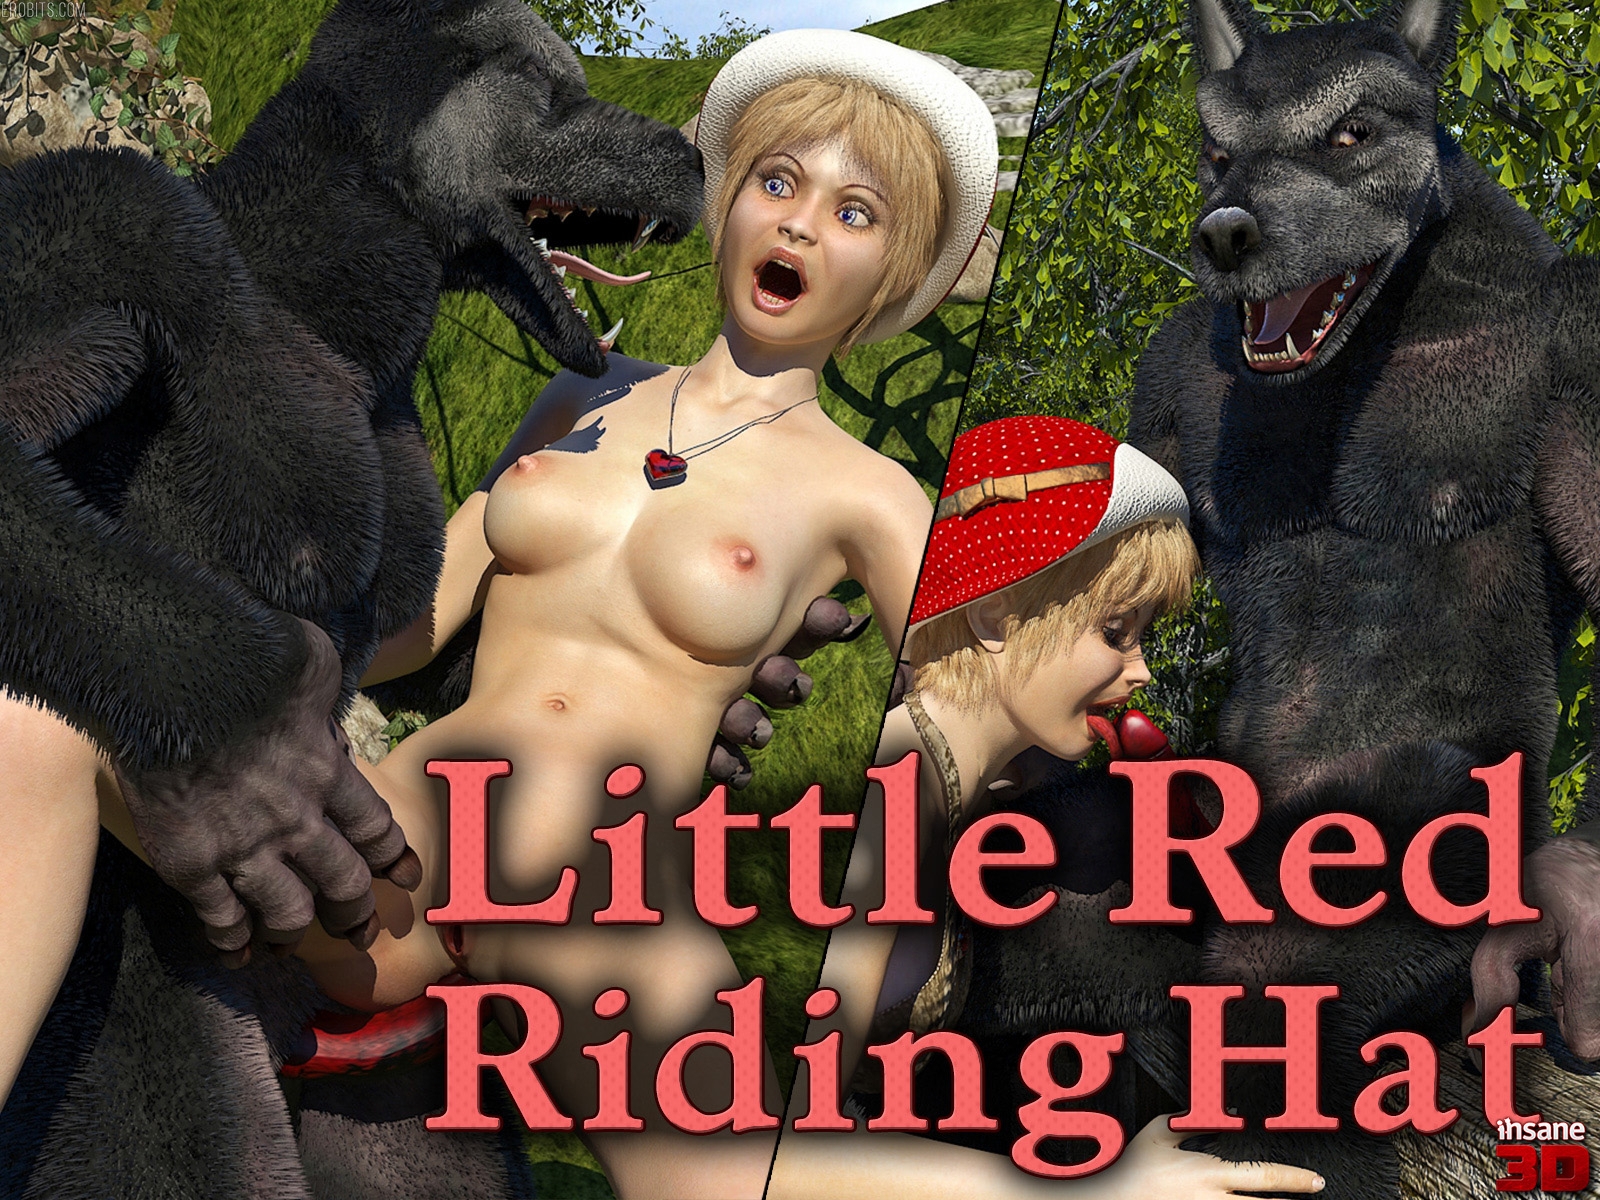 Little Red Riding Hat 👉 https://erobits.com/parody/little-red-riding-hat.html 👈